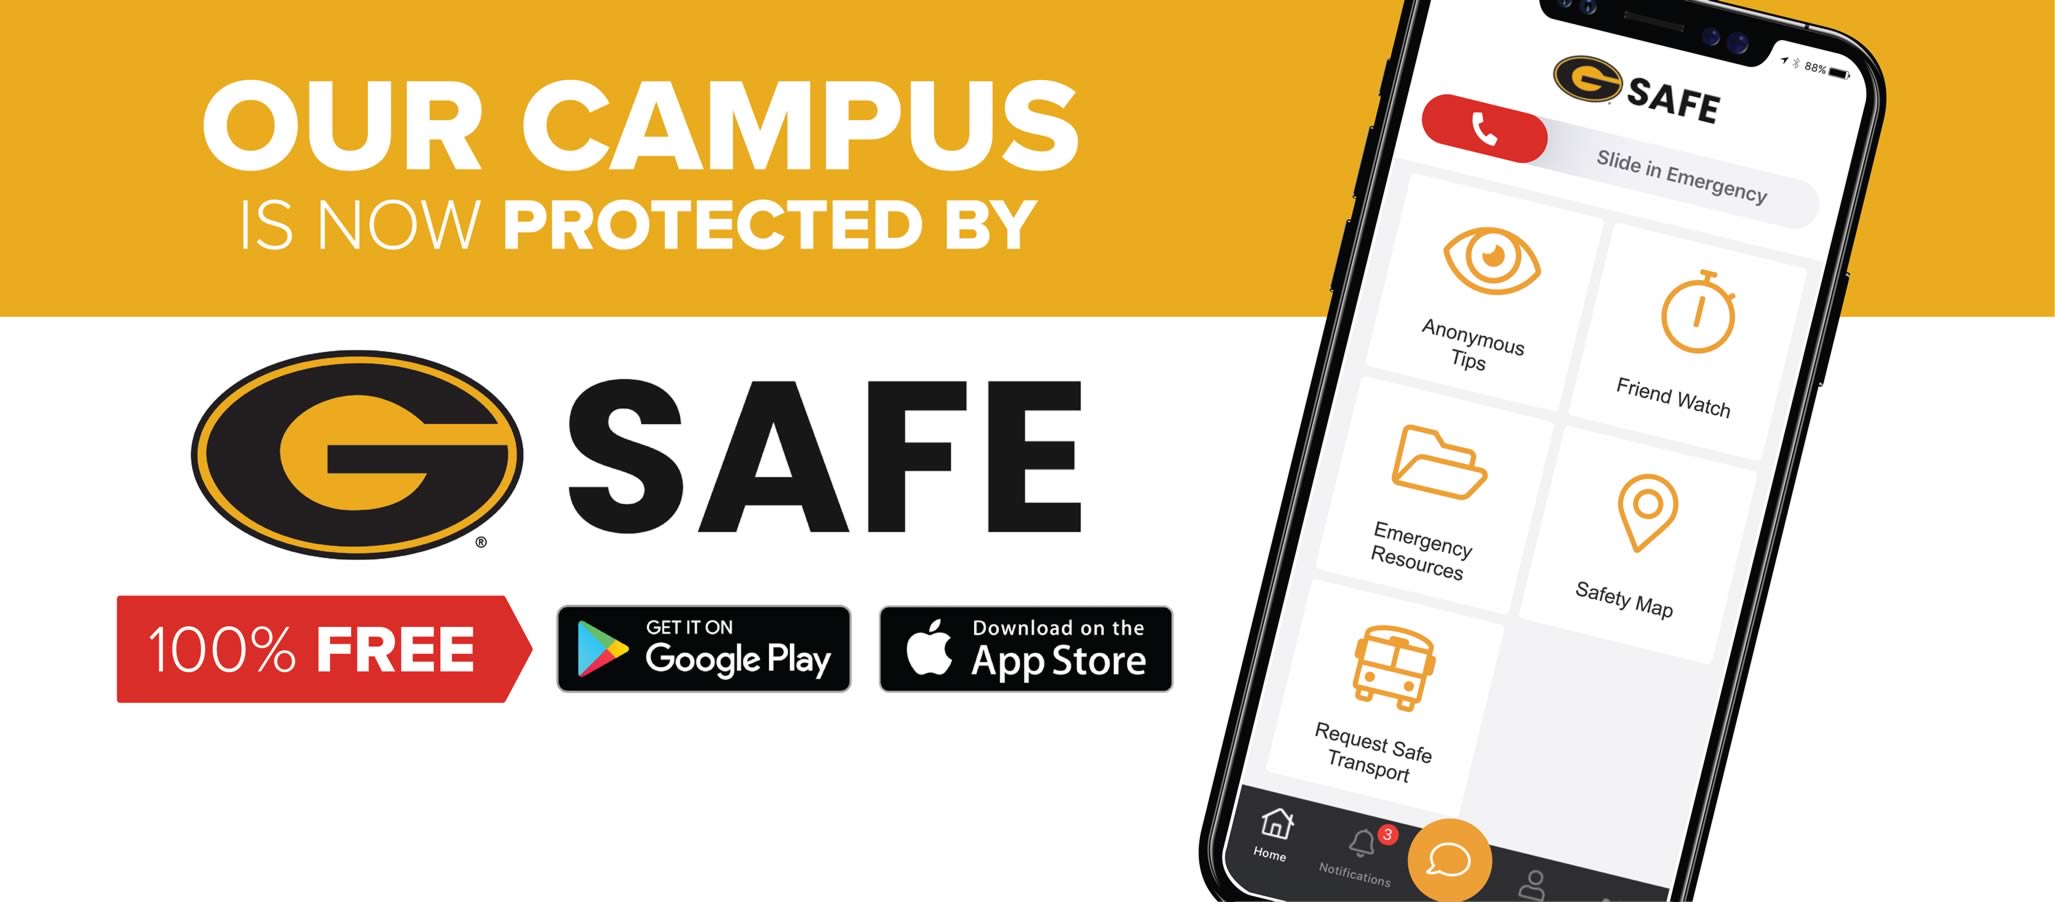 Stay Protected & Connected - Anonymously report safety concerns while attaching photos/videos, Contact campus safety forces quickly and directly in emergency situations - available free in your preferred app store.